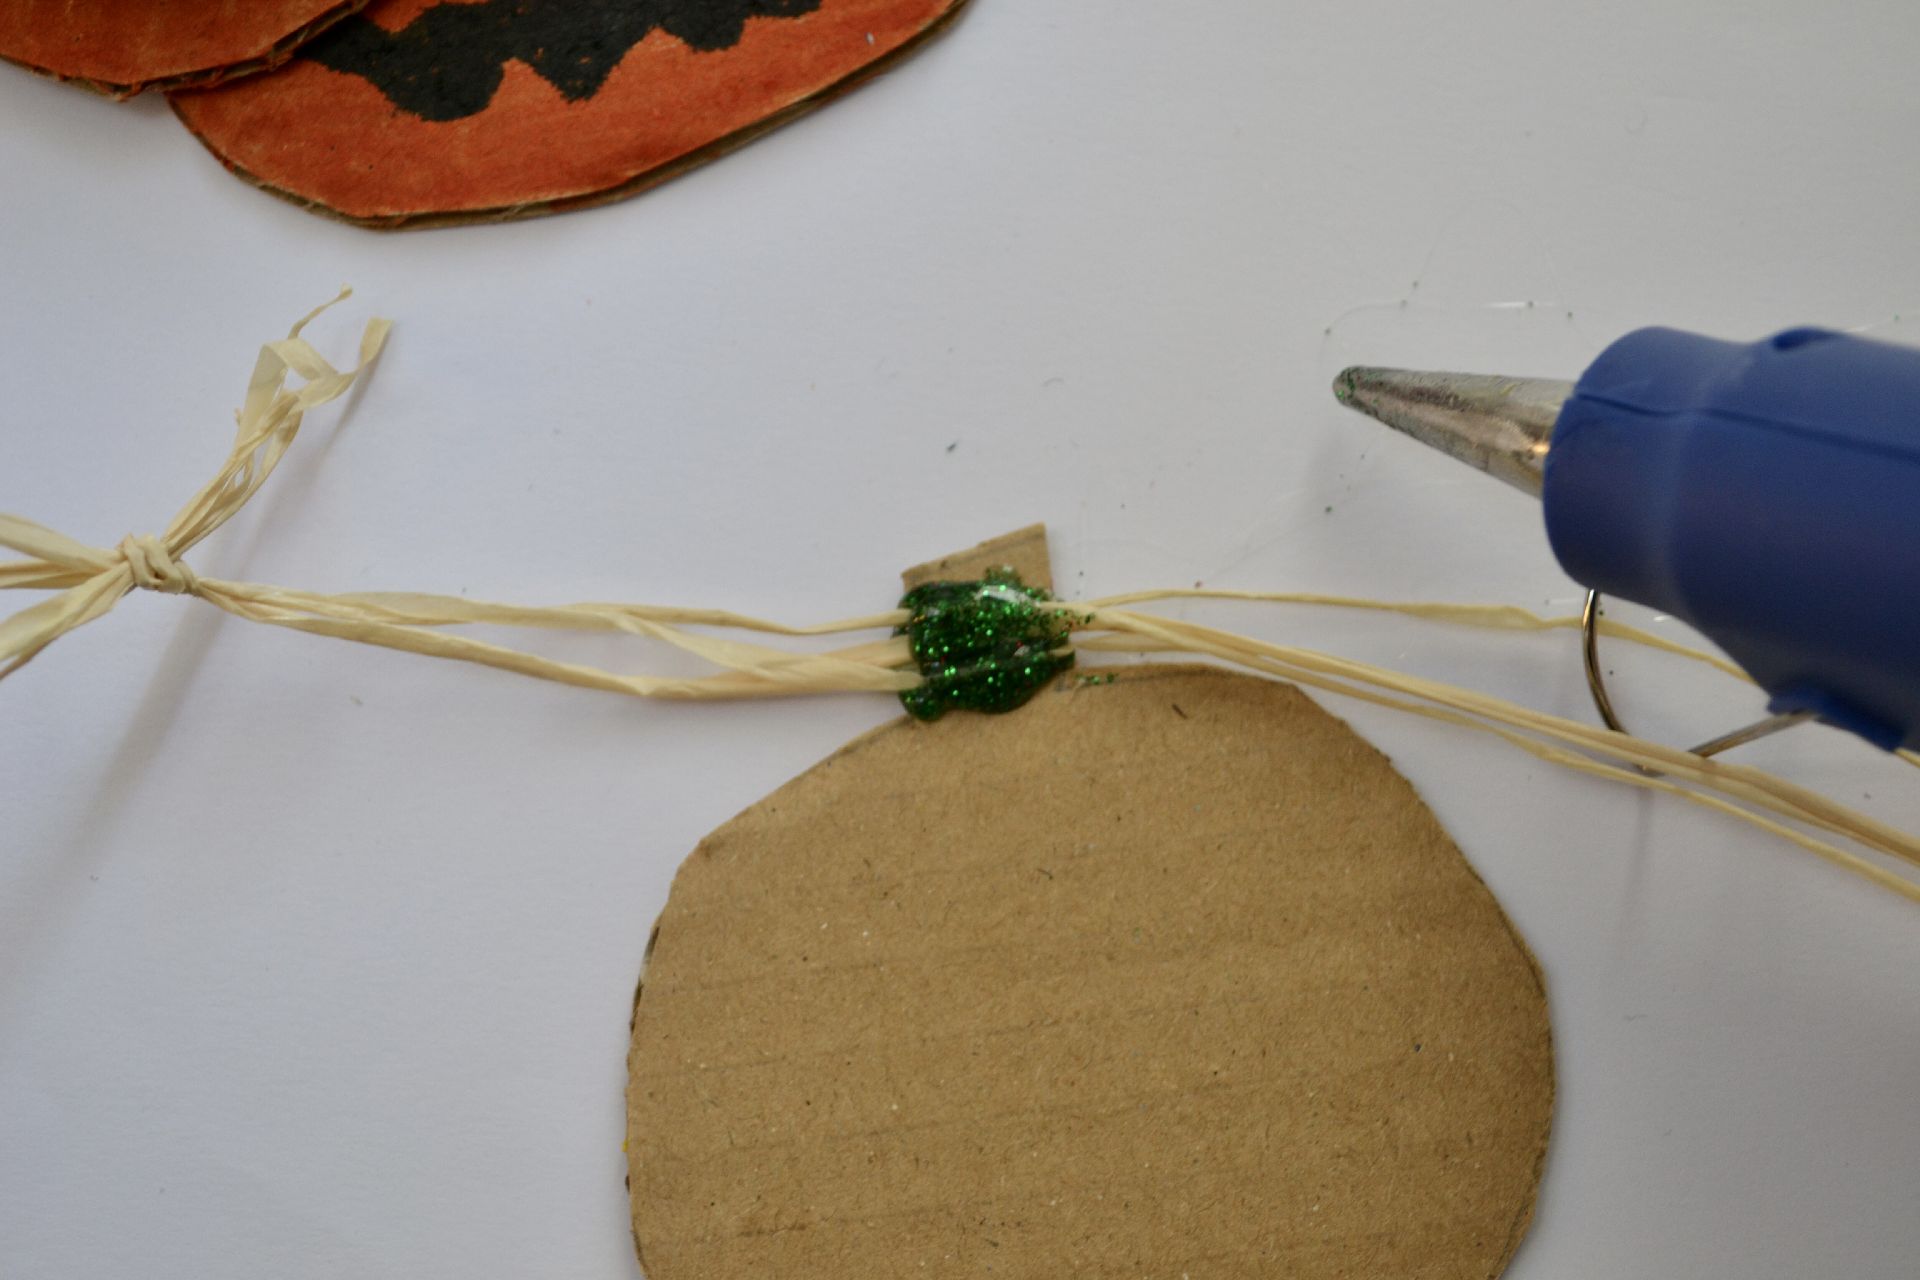 a piece of string attached to the back of the cardboard pumpkin